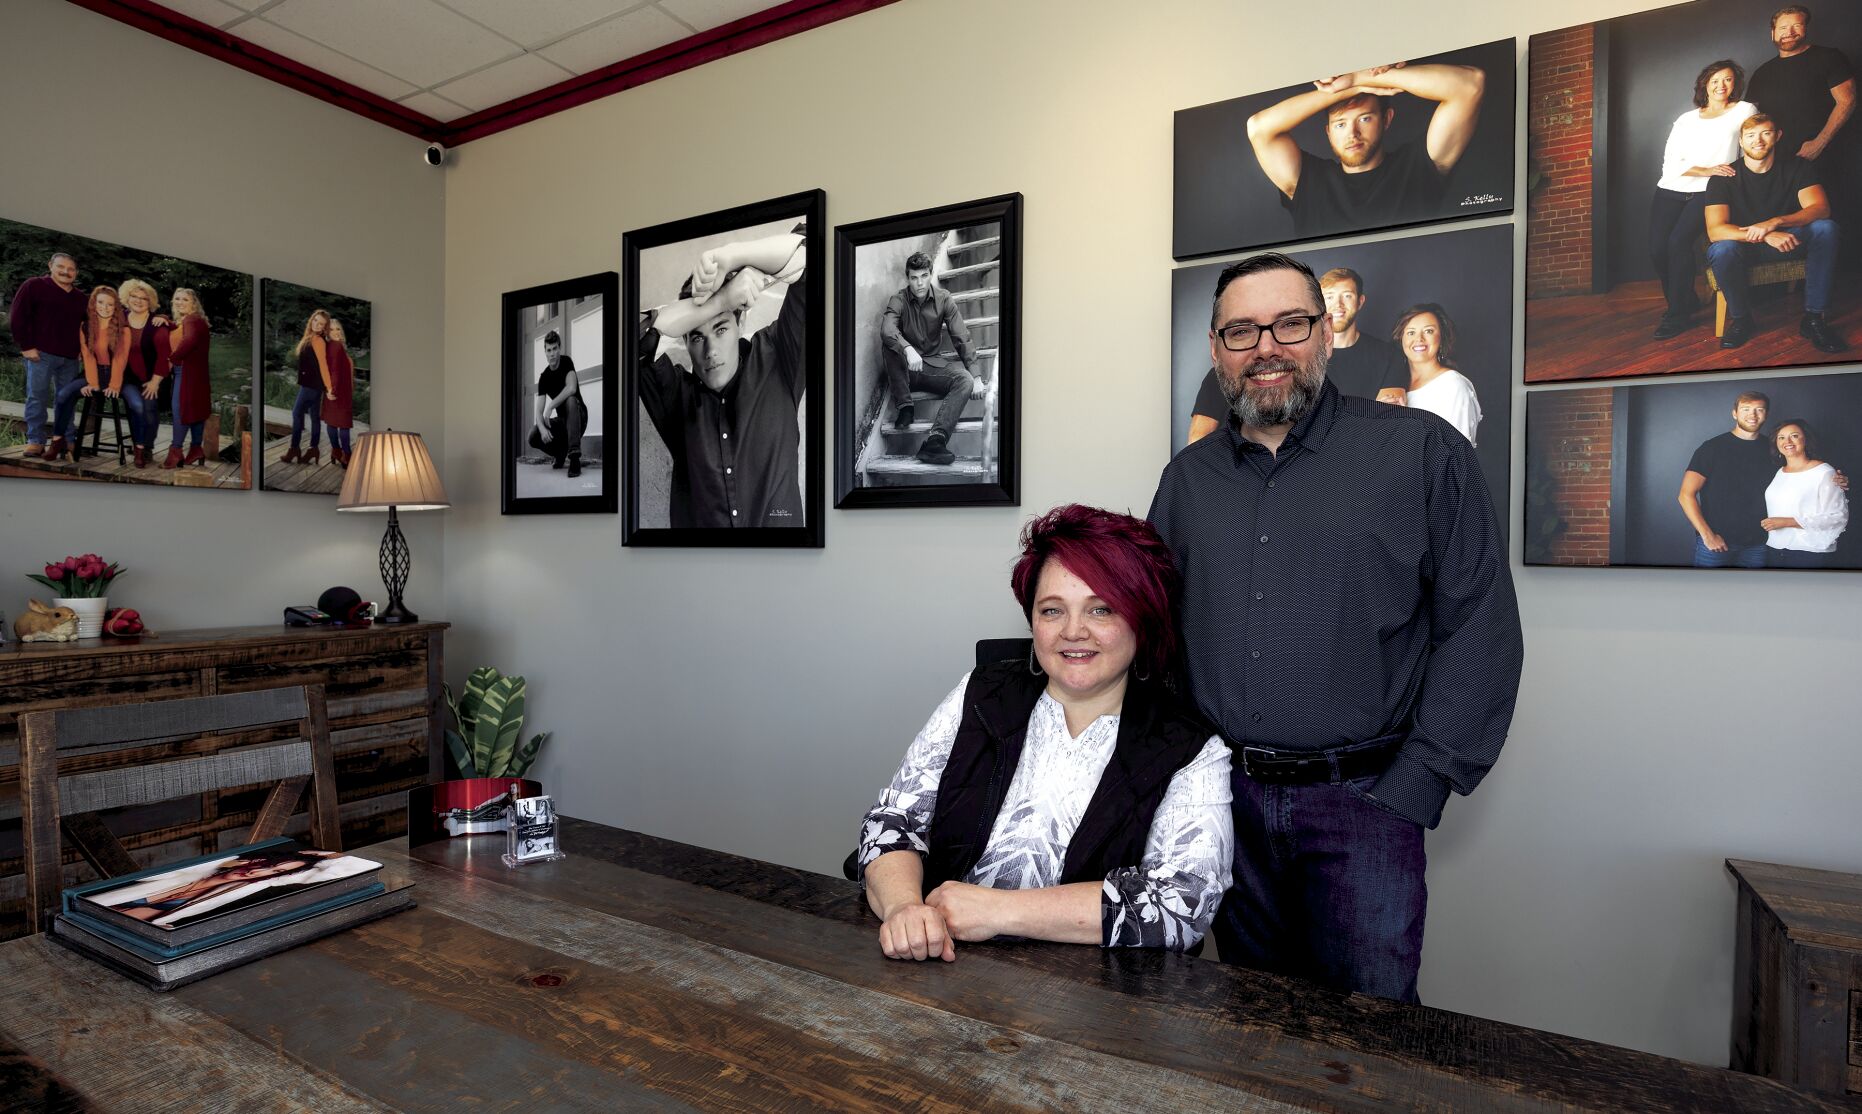 Kris and Scott Kelly, co-owners of Scott Kelly Portraits, pose in their Dubuque studio at 150 John F. Kennedy Road, Suite 1, after relocating from the Historic Millwork District. They have been in business for over 20 years.    PHOTO CREDIT: Stephen Gassman